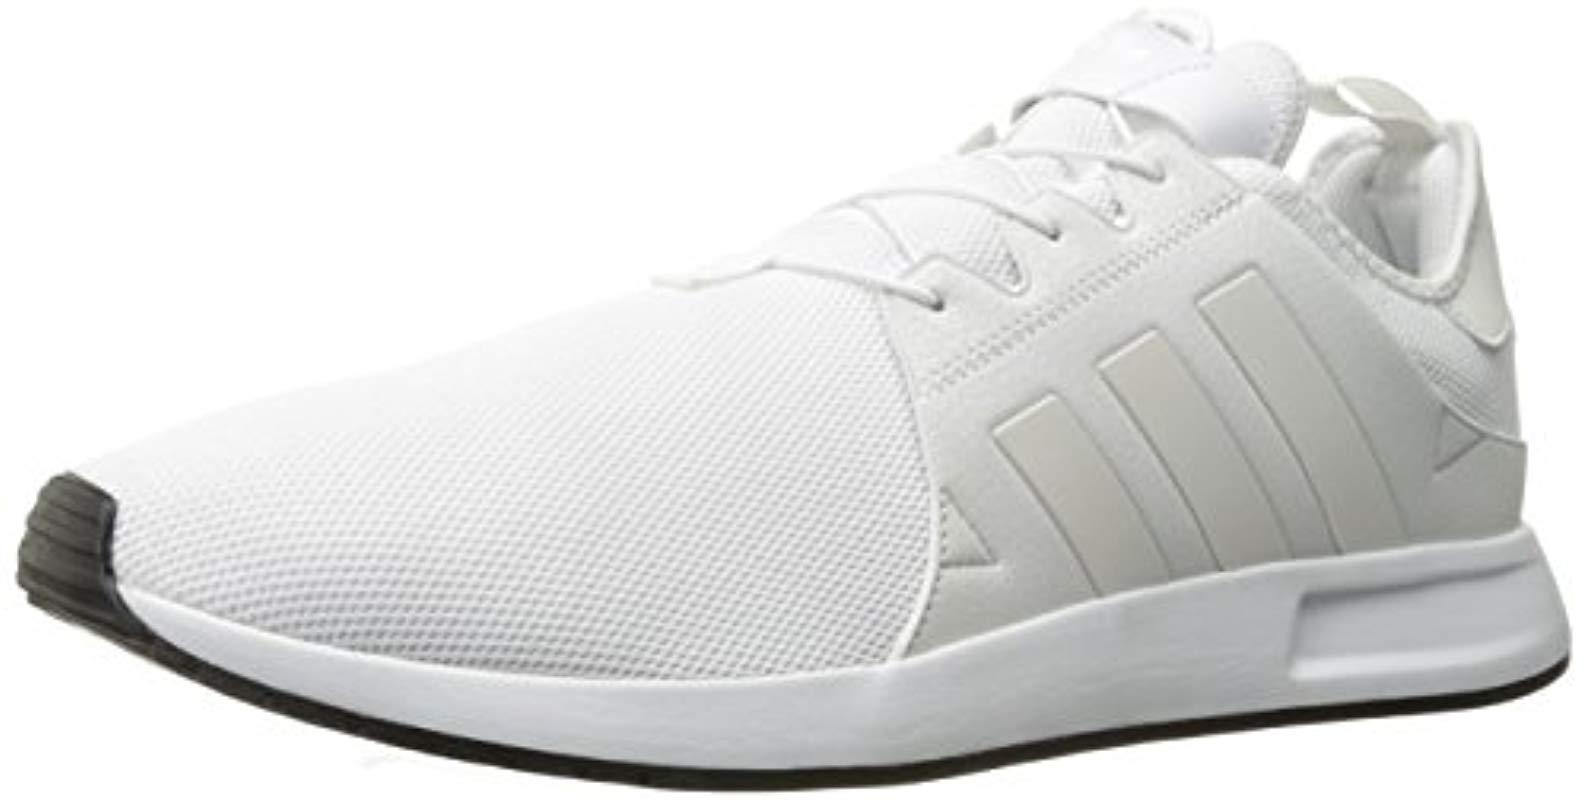 adidas Originals Rubber X_plr Sneakers, Lightweight, Comfortable And  Stylish With Speed Lacing System For Quick On-off Wear in White/White/Vintage  White st (White) for Men - Lyst